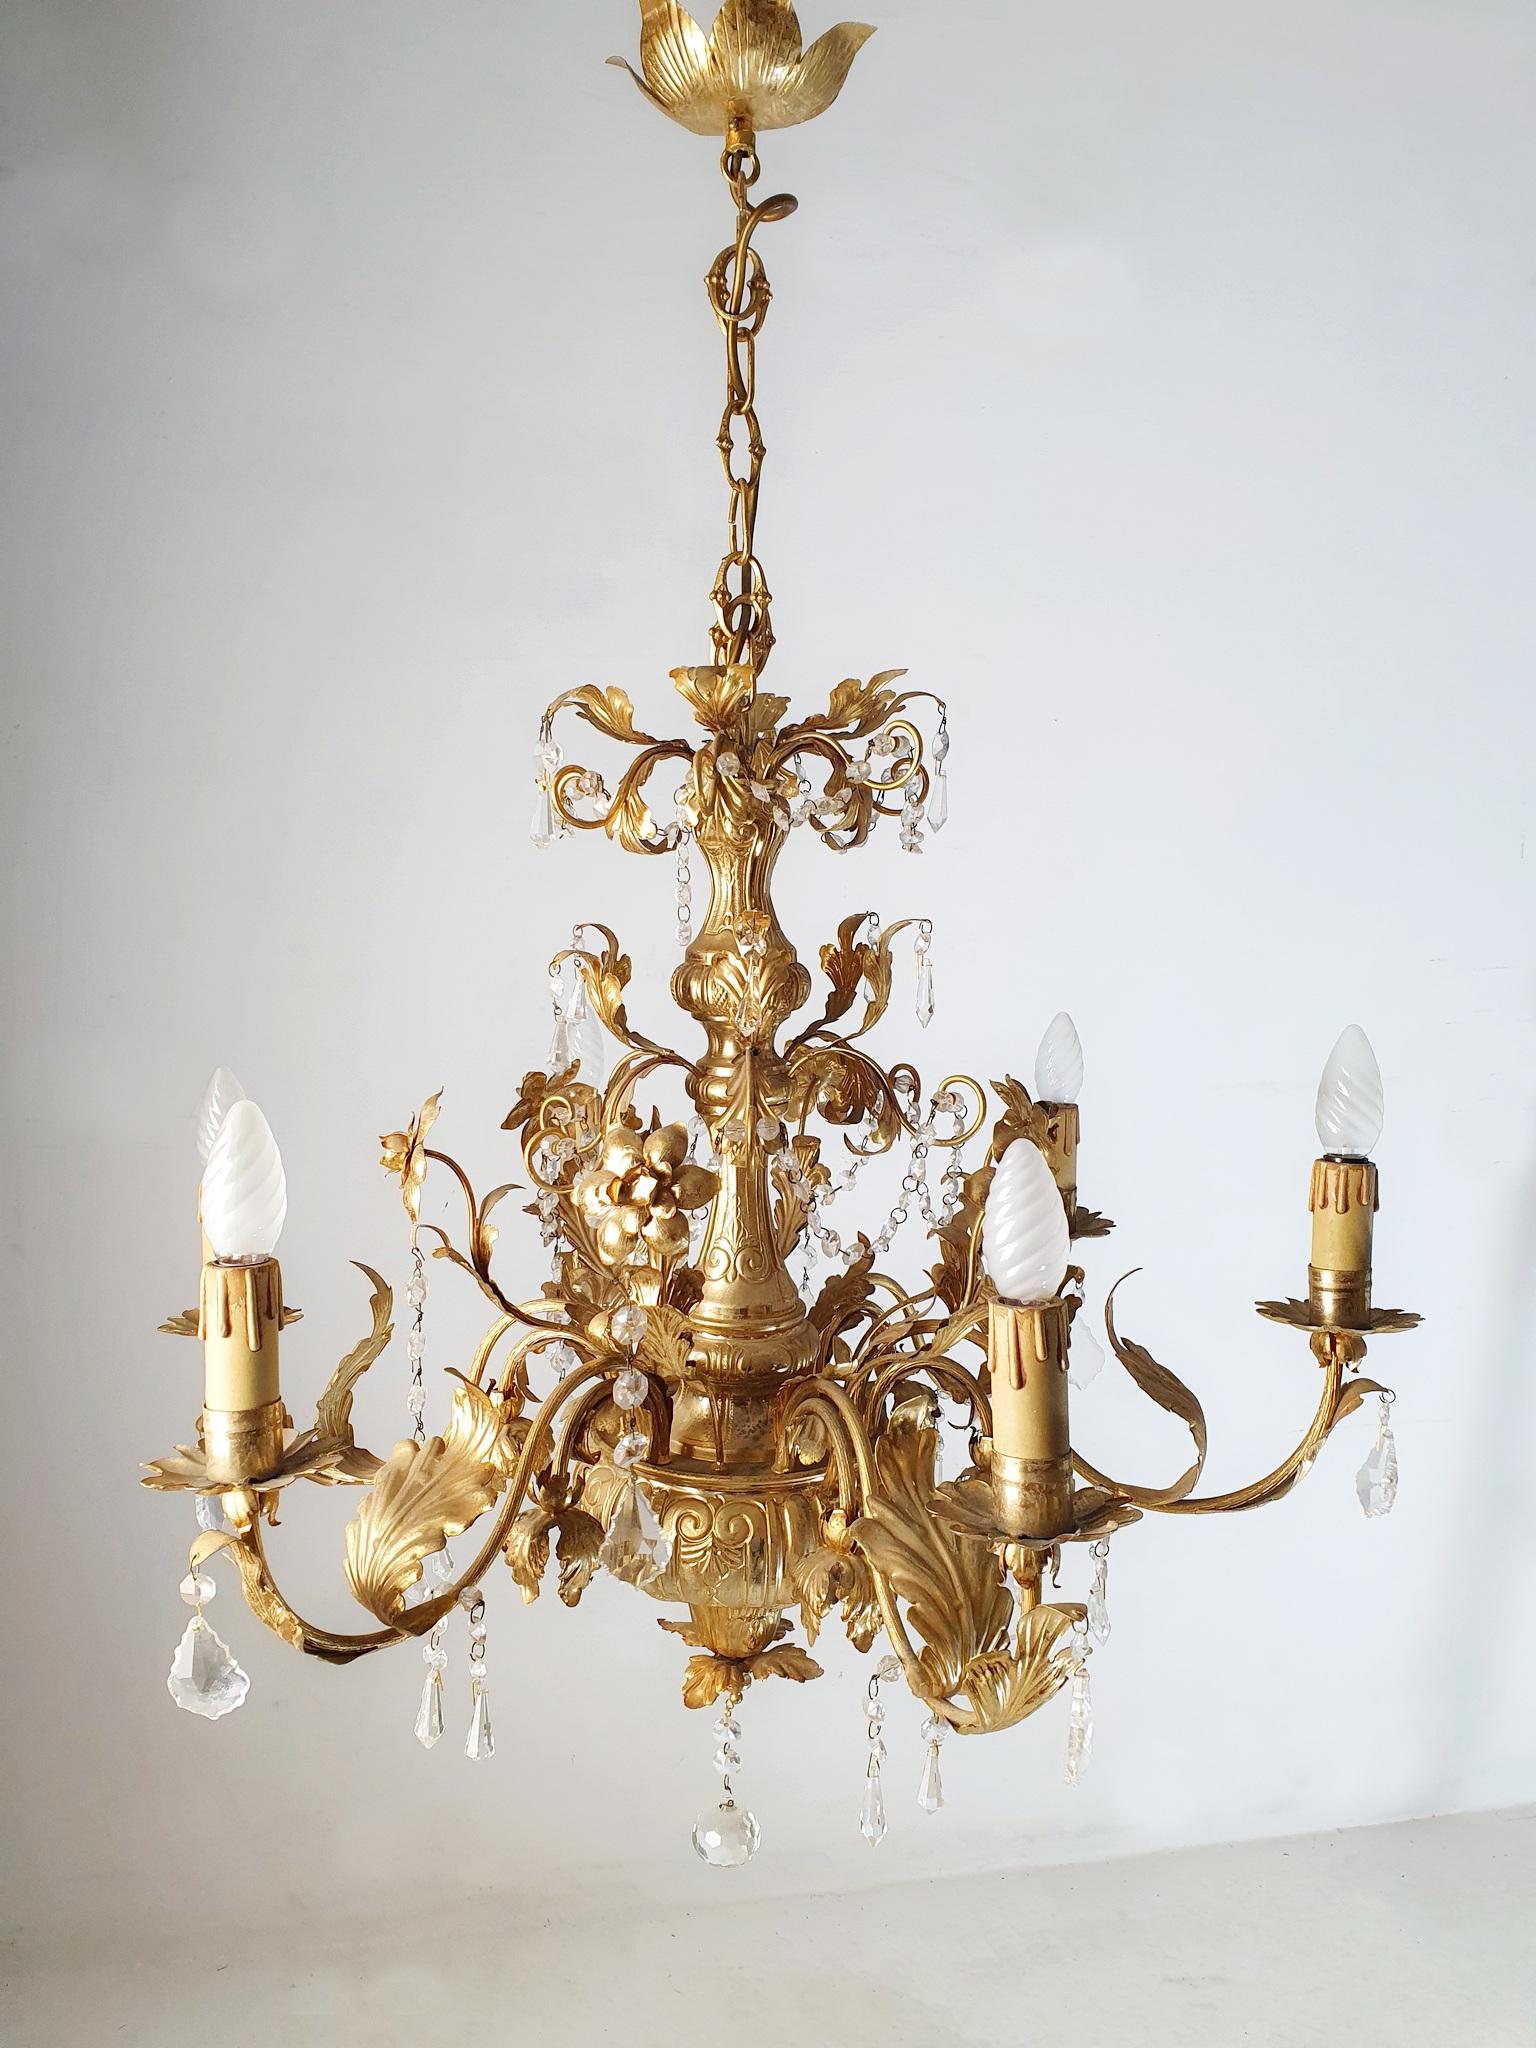 Chandelier in gold and crystal with six candle lights from the 1950's. Made from aluminium and gold plated with real gold, albeit thin, with a natural vintage patina. Ornately decorated with flowers leaves and crystals. In good working condition The